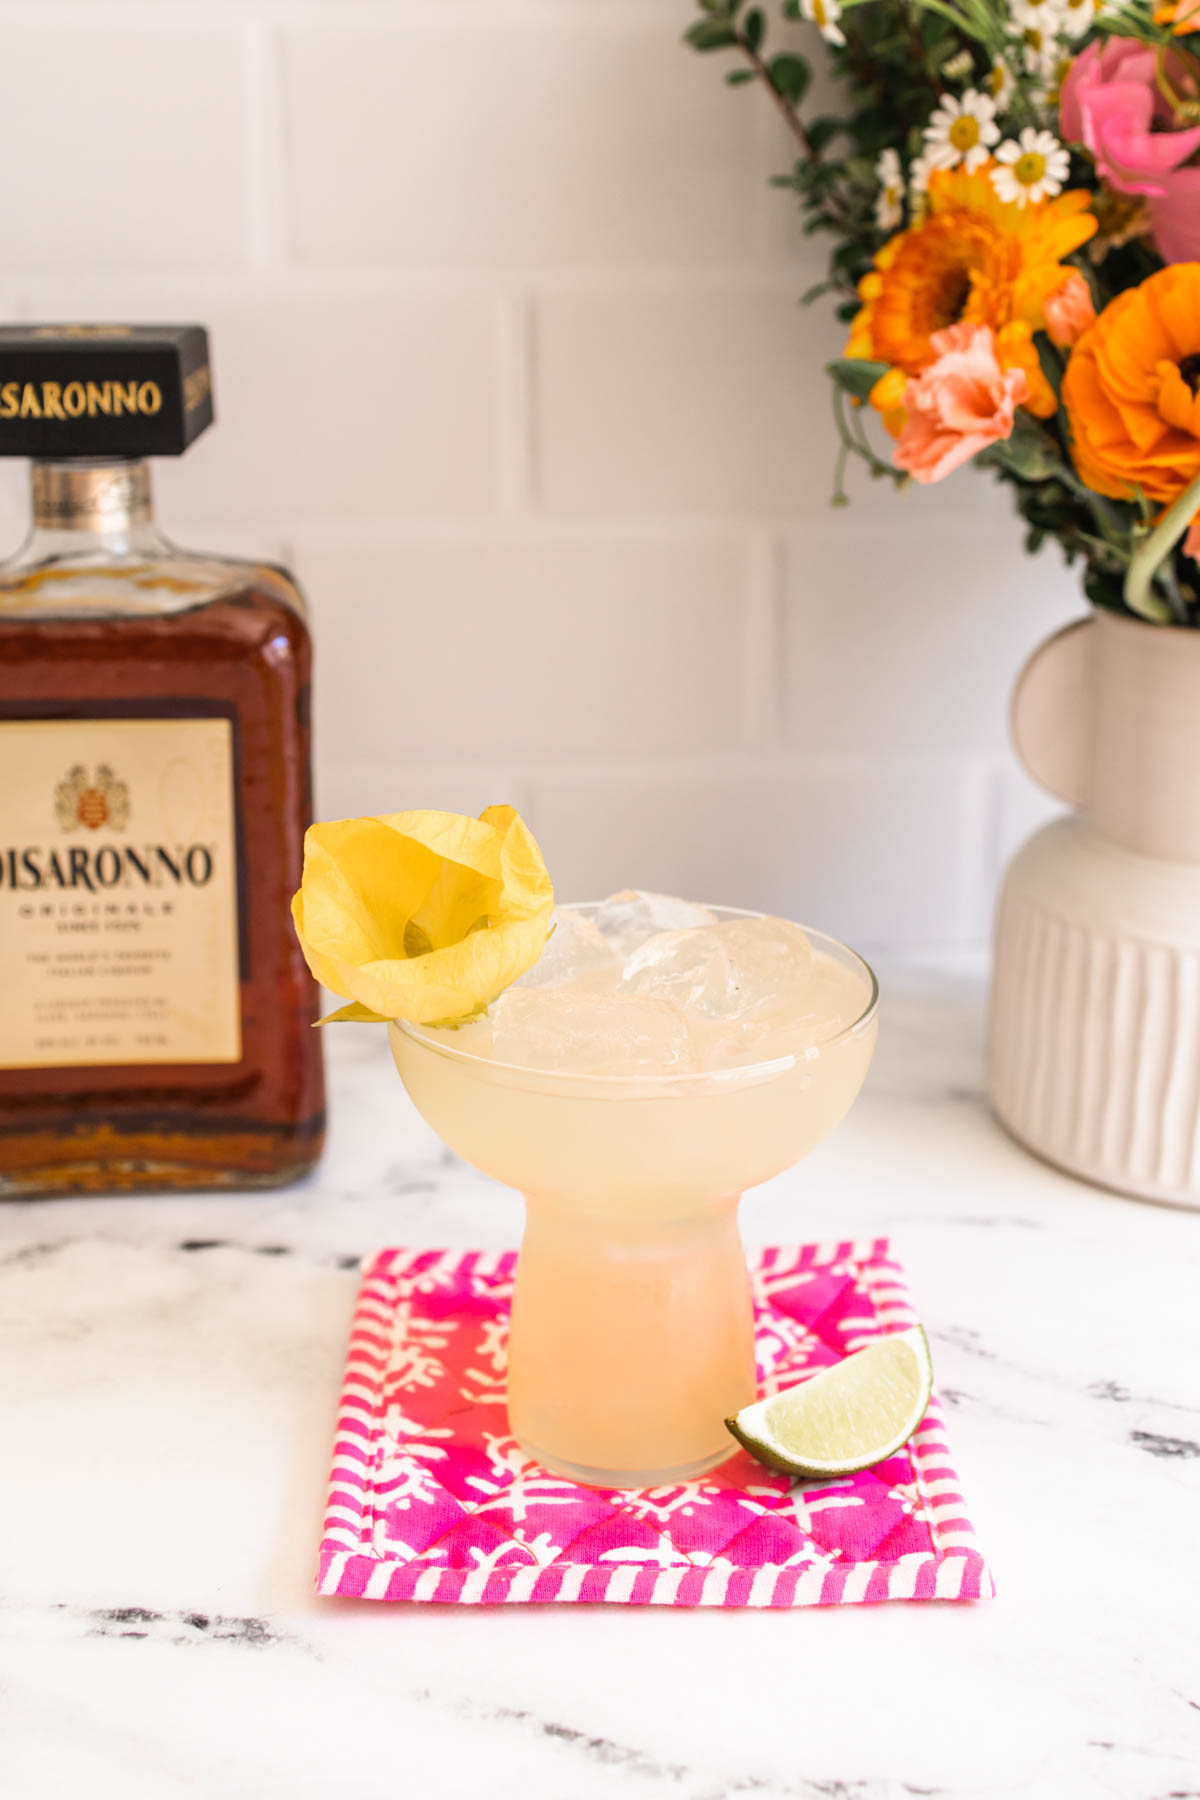 A glass of delicious Italian margarita garnished with a yellow flower.